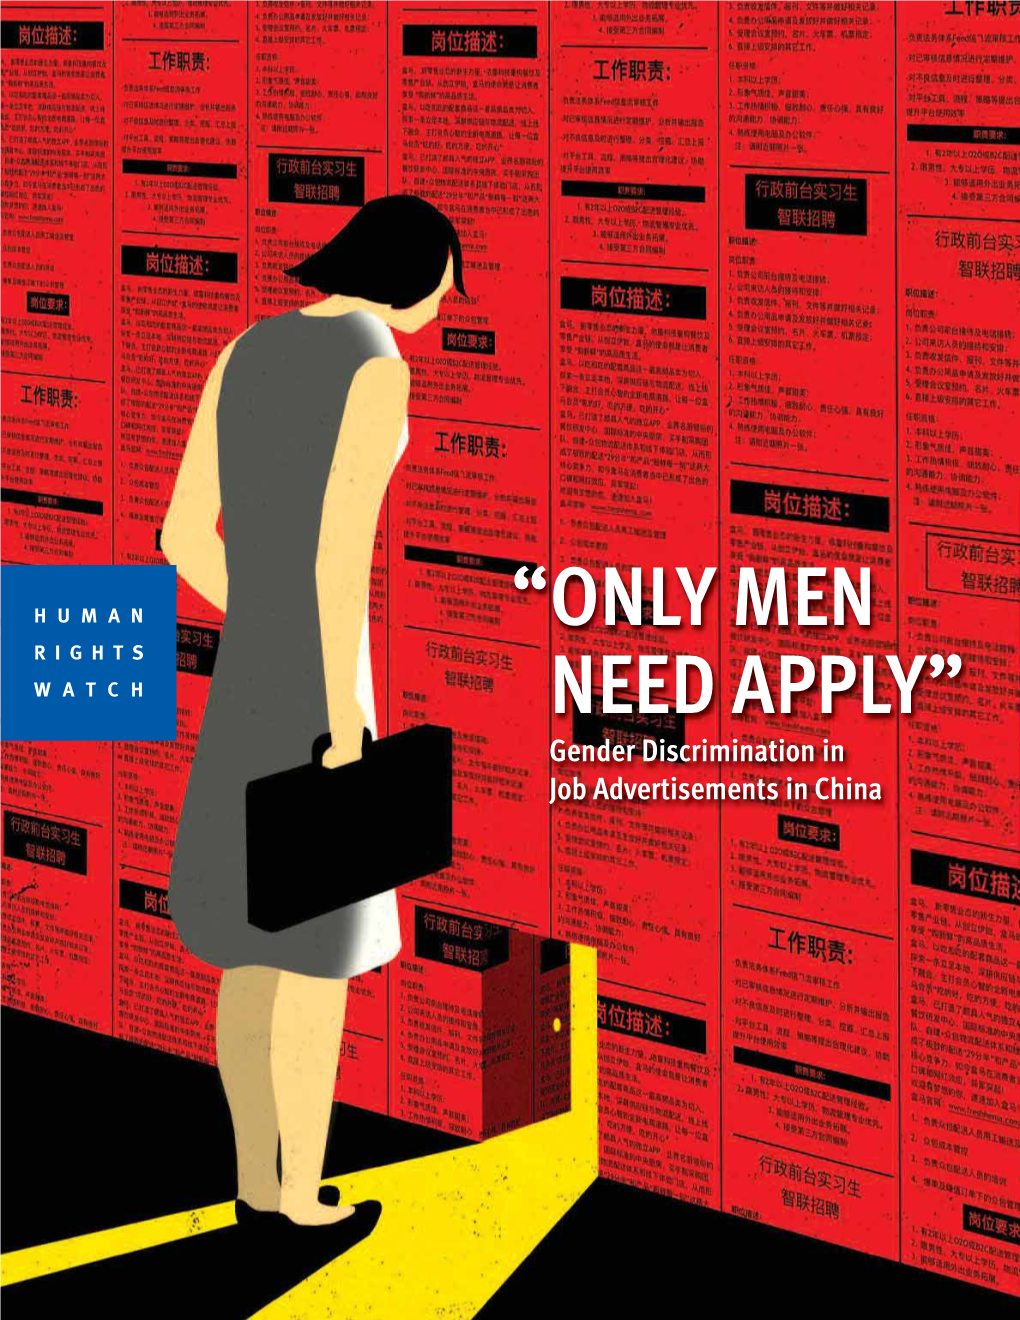 “Only Men Need Apply” Gender Discrimination in Job Advertisements in China